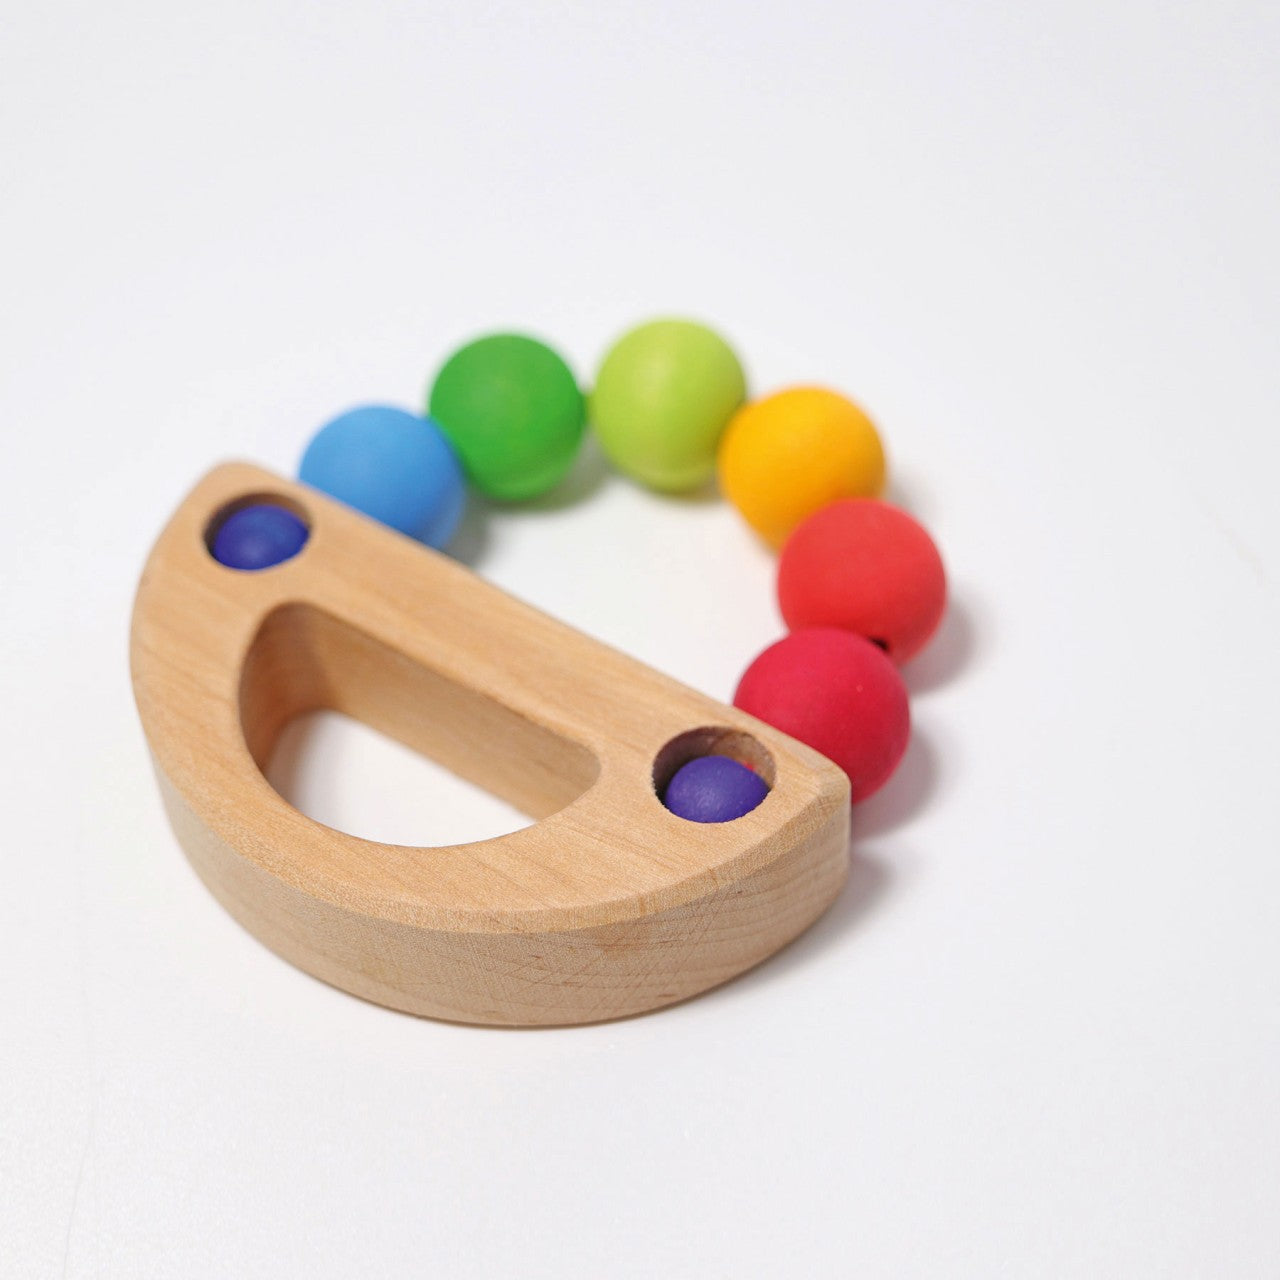 Wooden Grimm's Rainbow Boat Grasping Toy